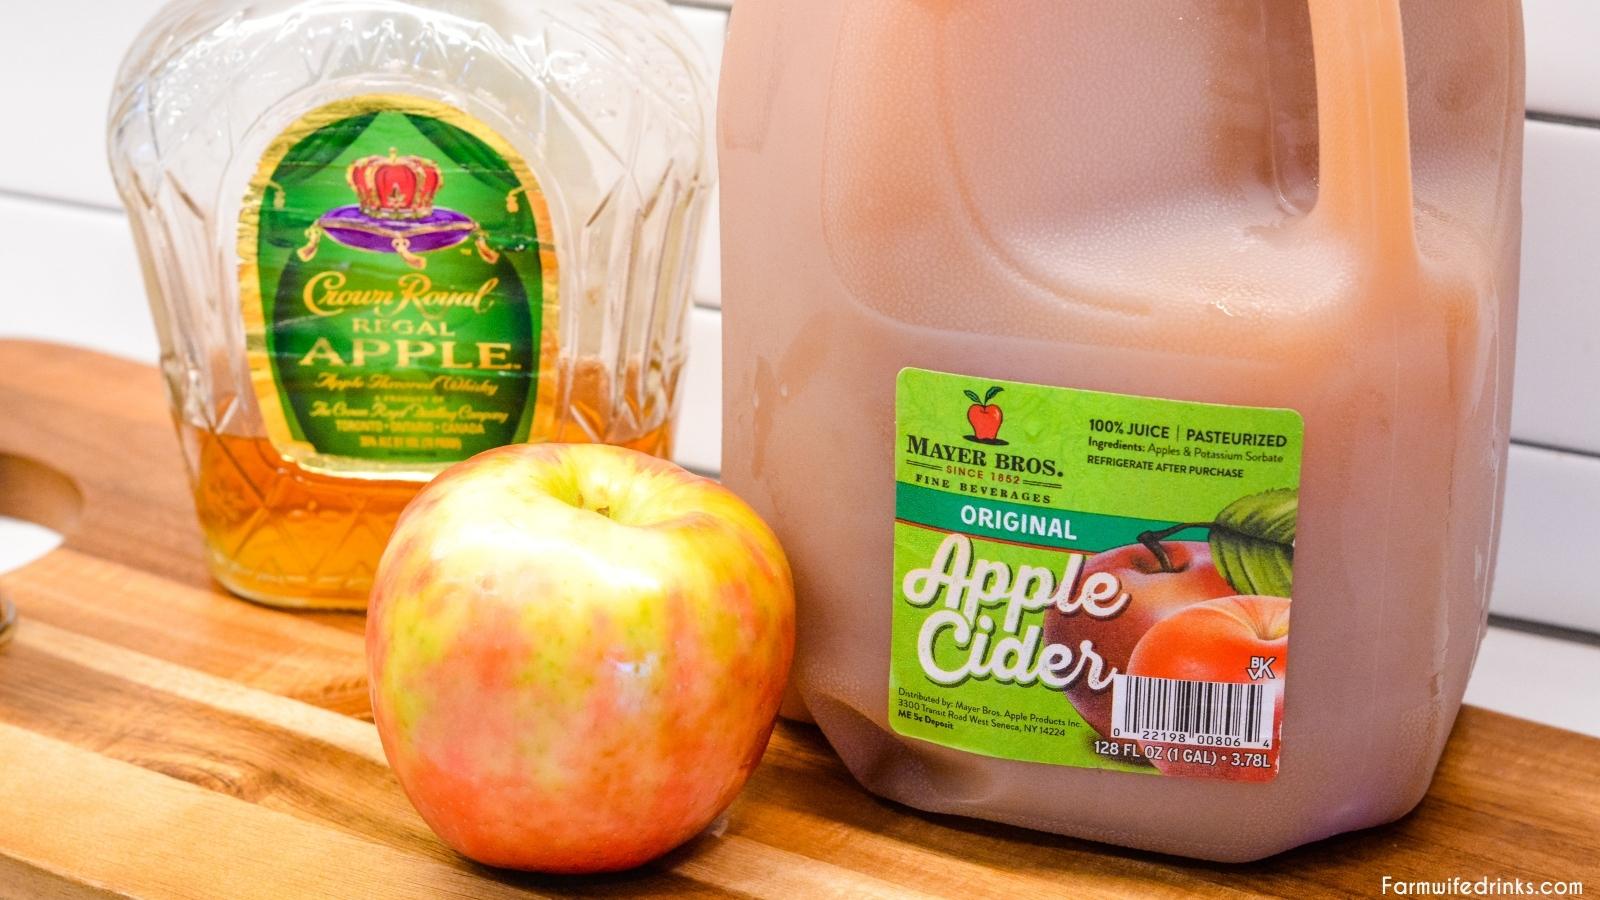 Apple Cider Whiskey ingredients - Apple Cider and Crown Royal Apple Whiskey